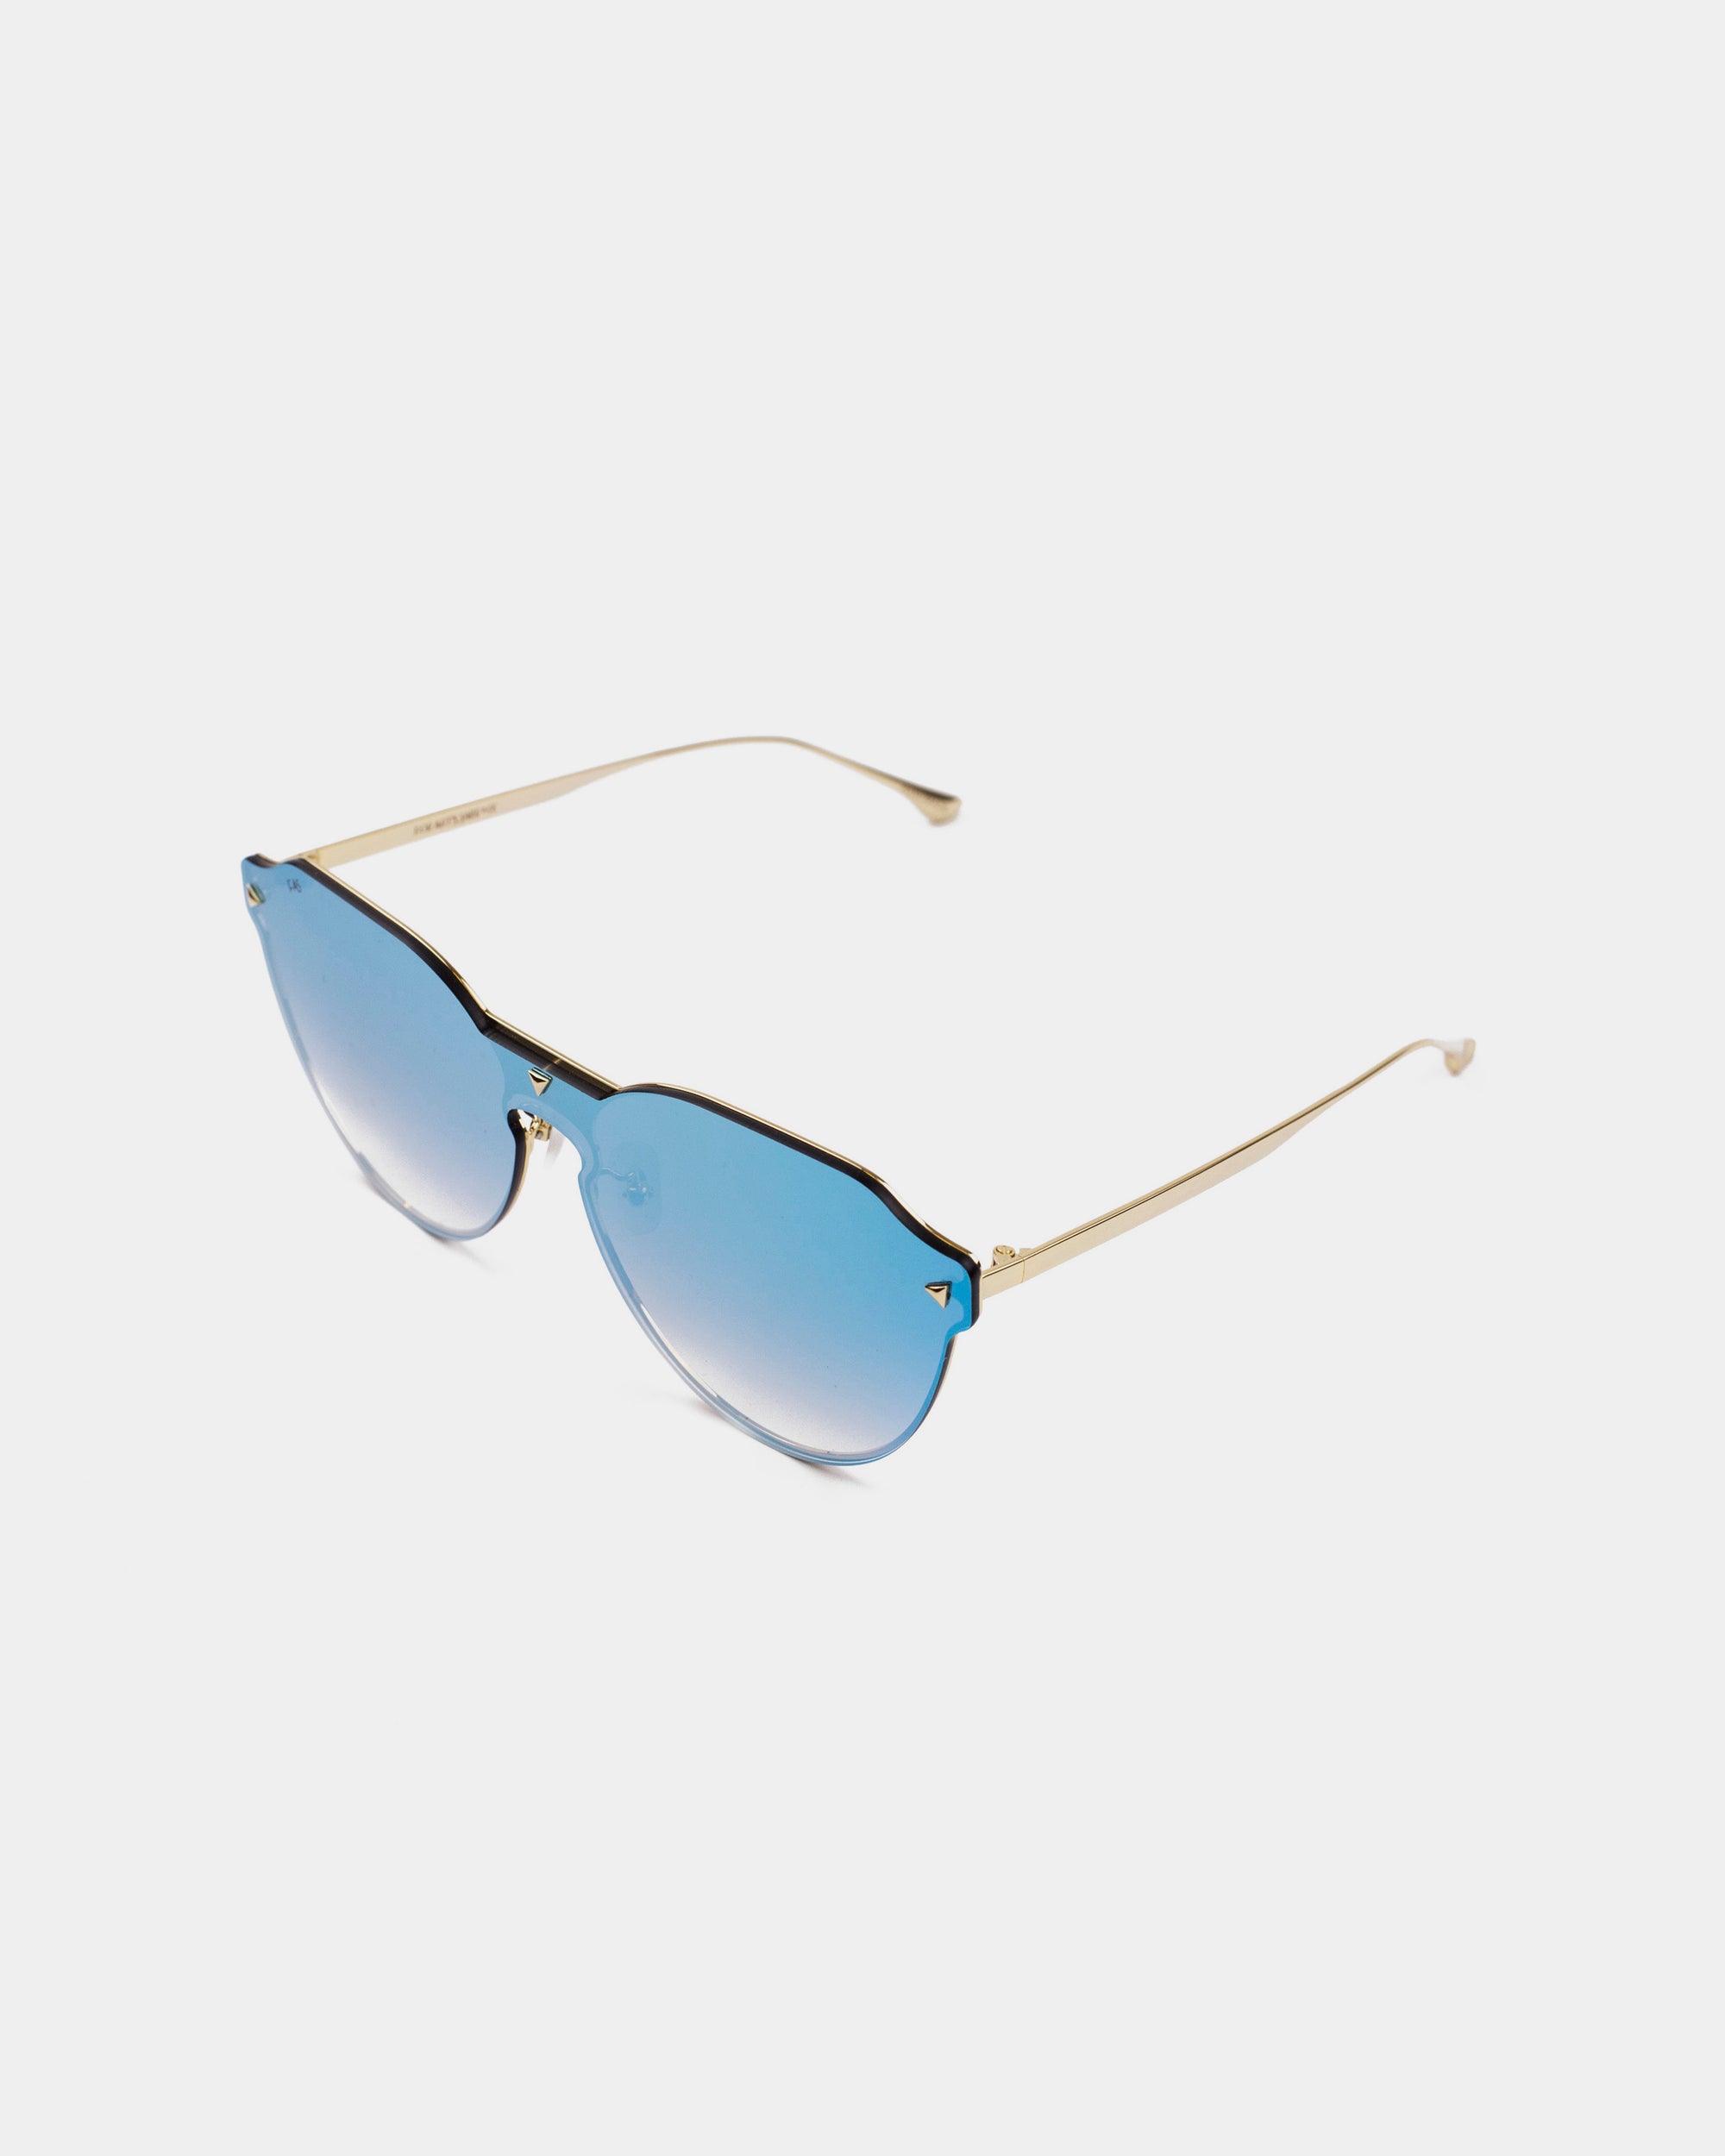 A pair of stylish sunglasses featuring thin gold frames with 18-karat gold plating and blue-tinted lenses. The design is modern and minimalist, with a sleek and lightweight appearance. The nylon lenses offer UV protection, ensuring both style and functionality. The background is plain white. These are the Error 404 by For Art's Sake®.